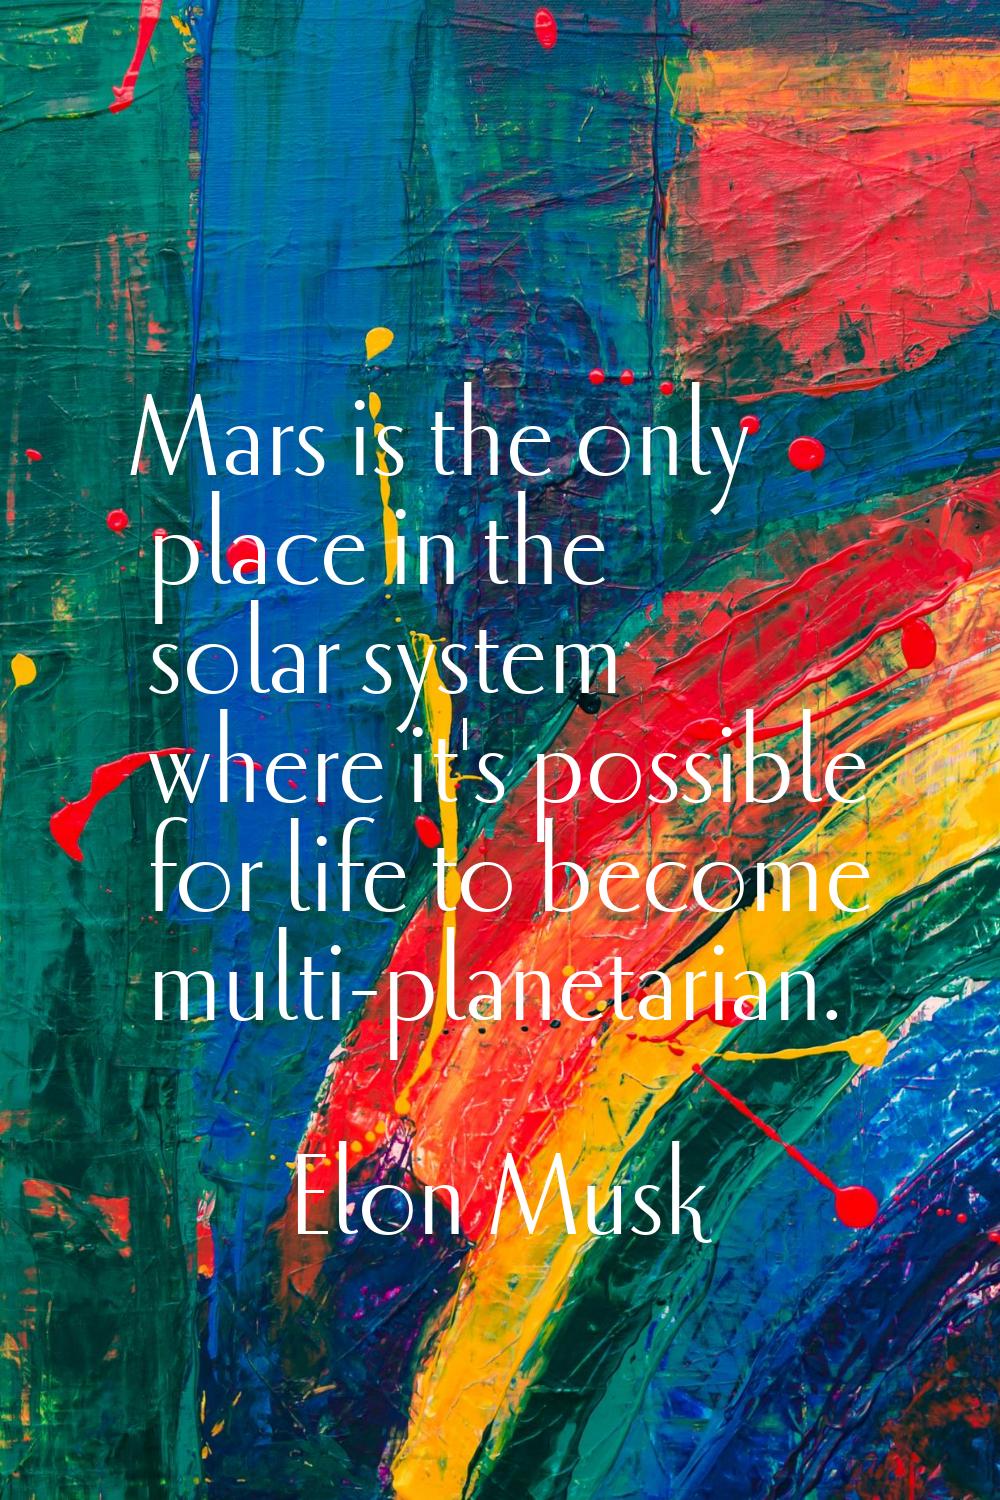 Mars is the only place in the solar system where it's possible for life to become multi-planetarian